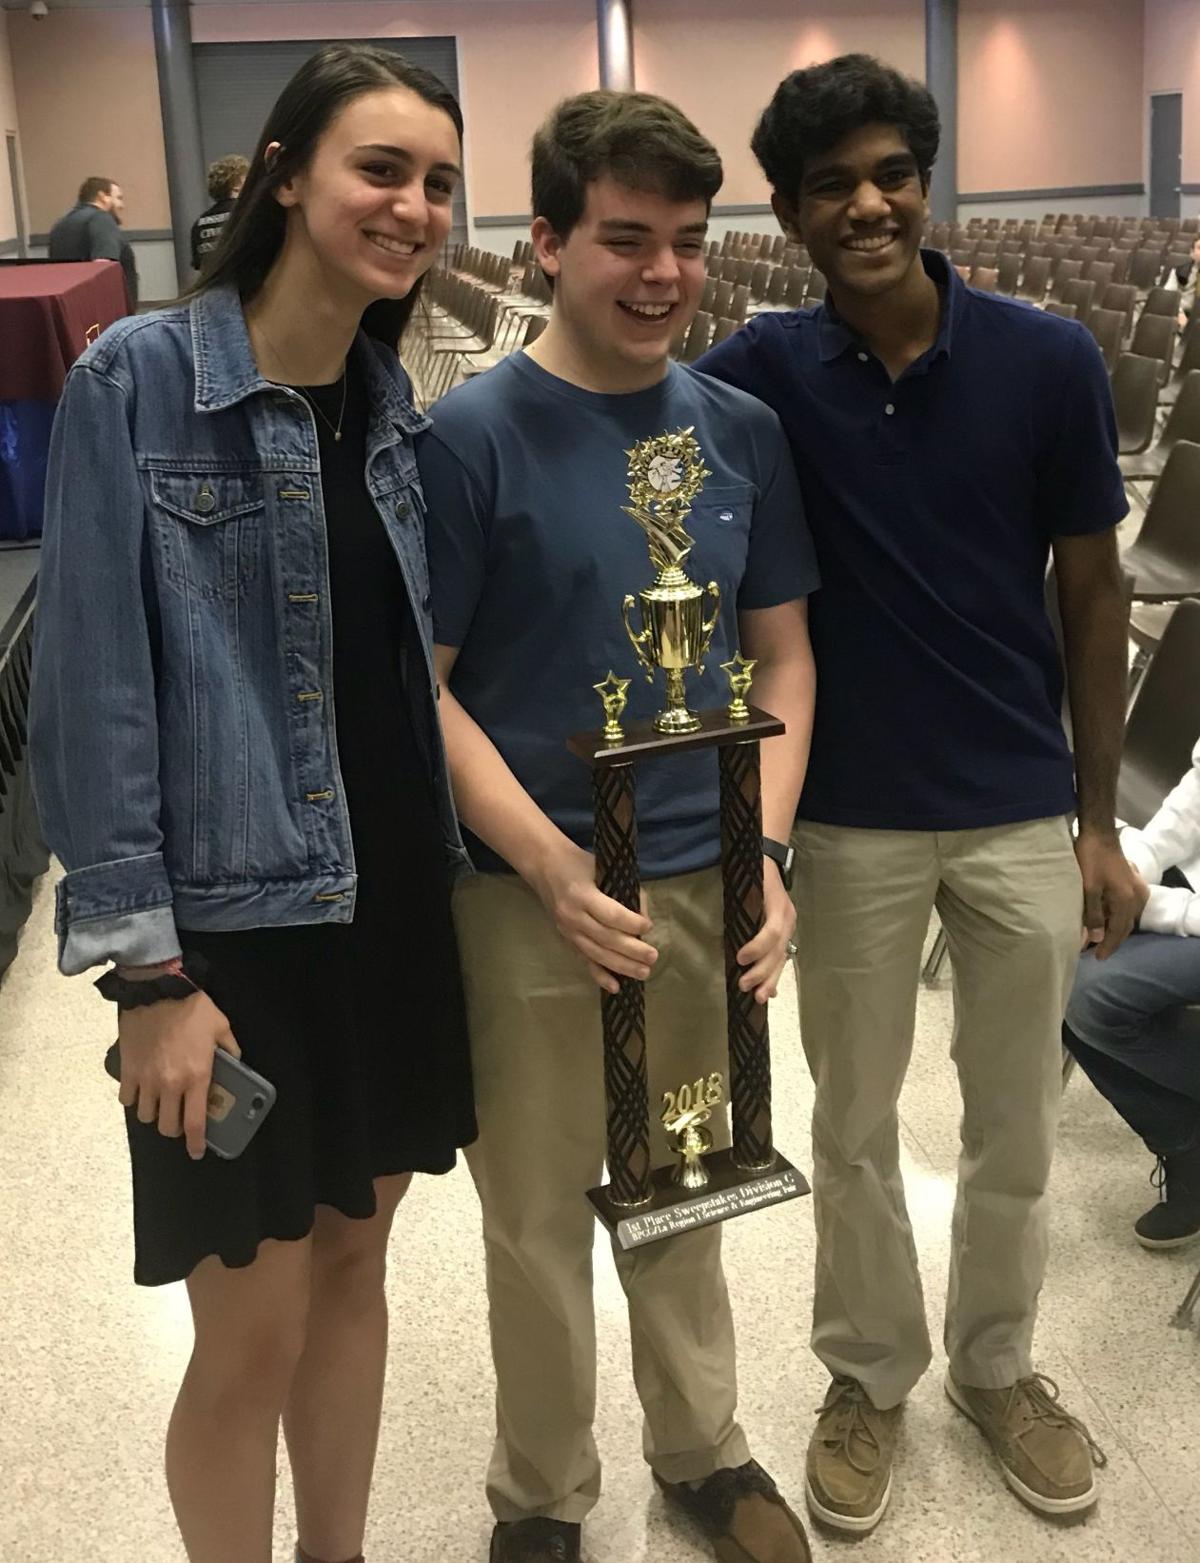 SMART students top winners in regional and state science fairs | Community | www.bagsaleusa.com